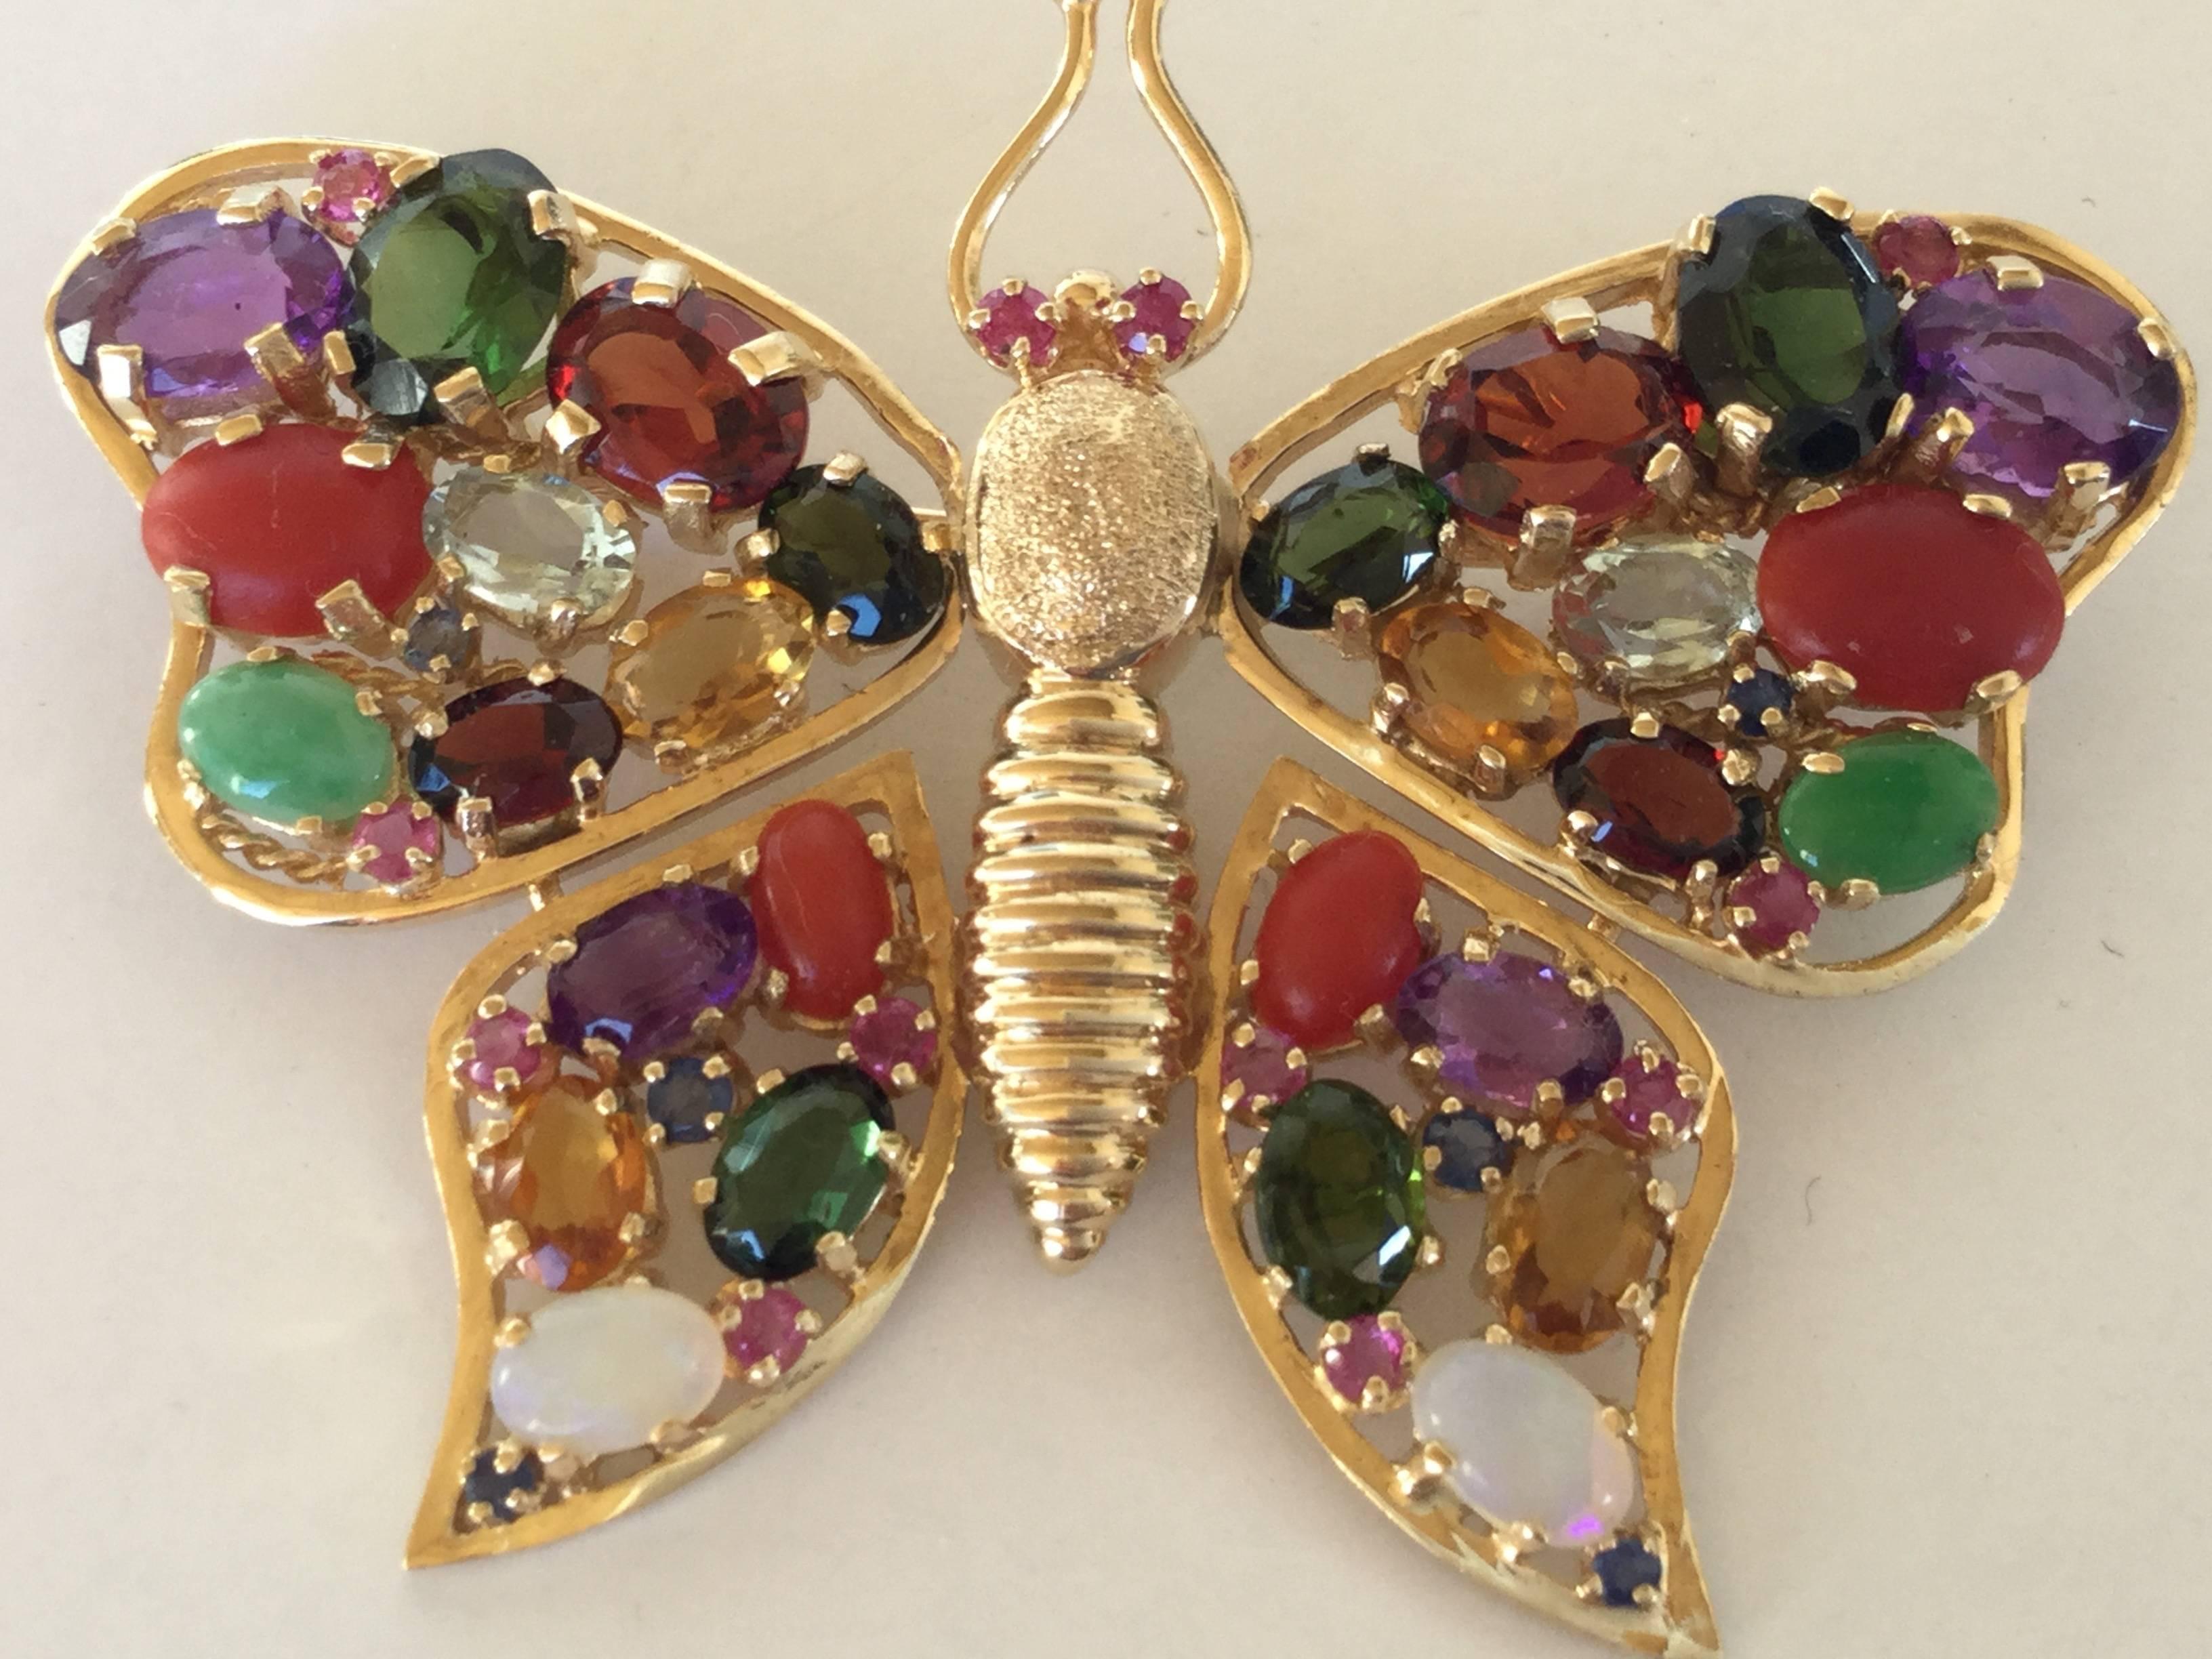 Dazzling 1960's butterfly brooch crafted of 14kt yellow gold. The entire surface if just encrusted in gemstones both faceted and cabochon.
There are 4 garnets, 6 tourmalines, 4 amethysts, 2 aquamarines, 4 carnelians, 2 opals, 4 citrines, 10 small